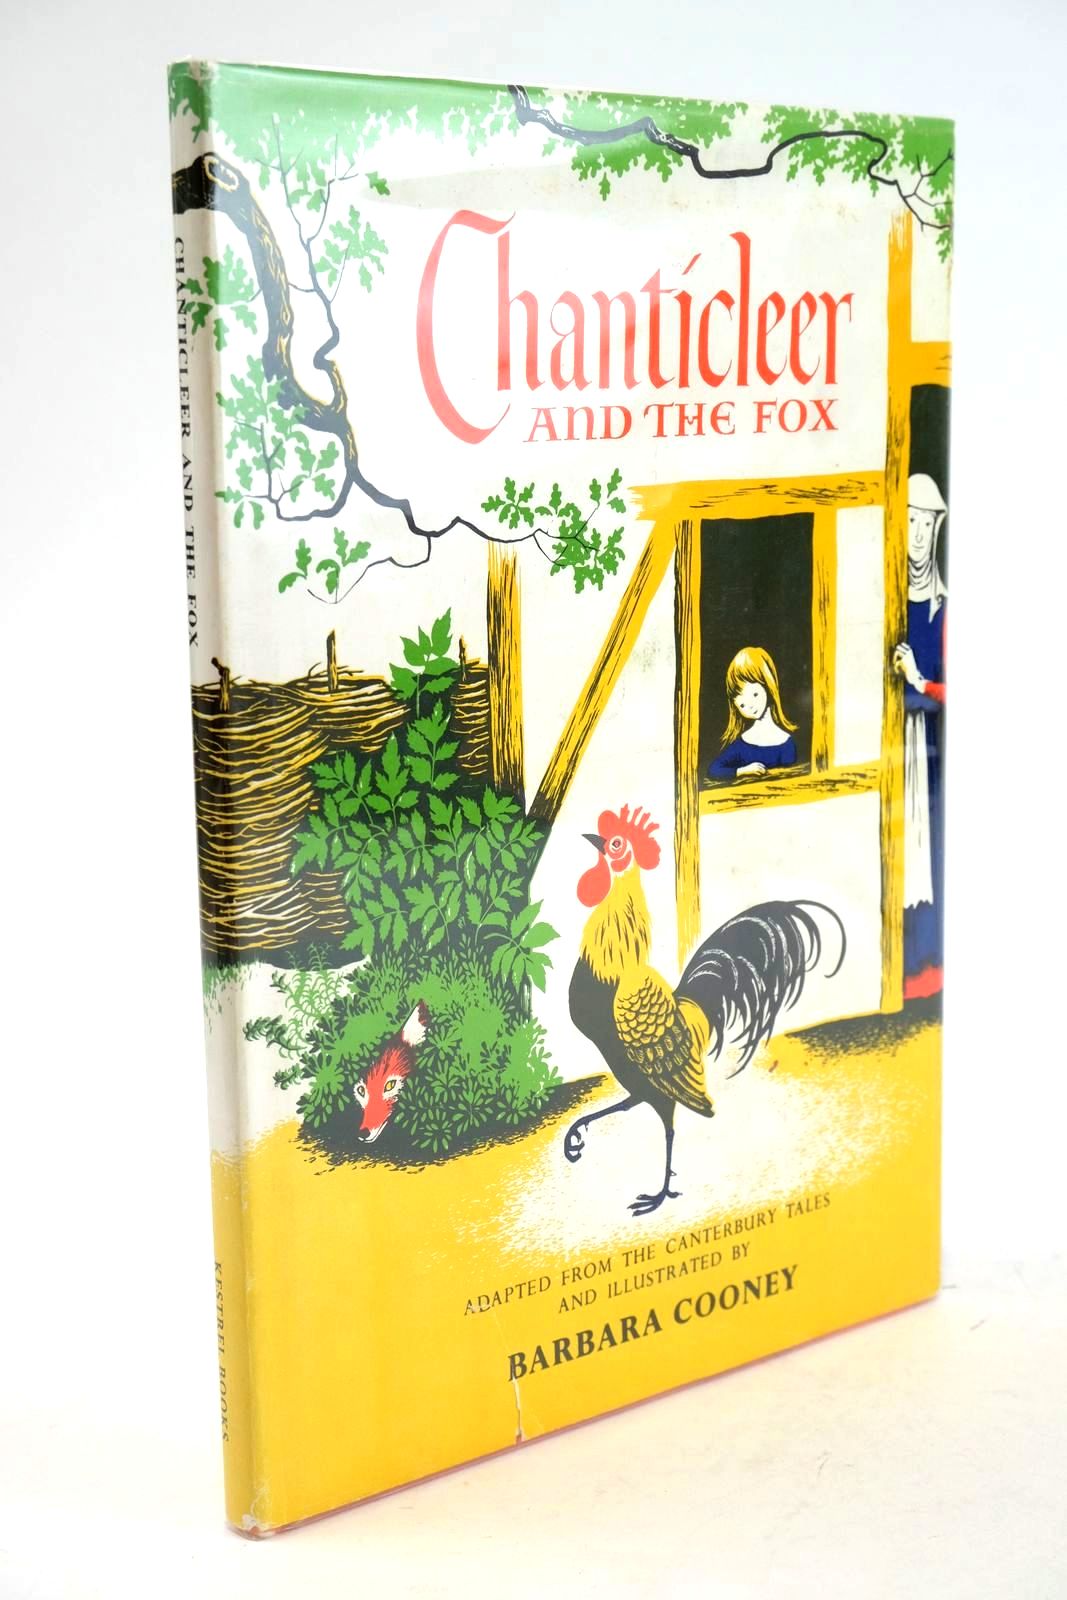 Photo of CHANTICLEER AND THE FOX written by Chaucer, Geoffrey Cooney, Barbara illustrated by Cooney, Barbara published by Kestrel Books (STOCK CODE: 1324180)  for sale by Stella & Rose's Books